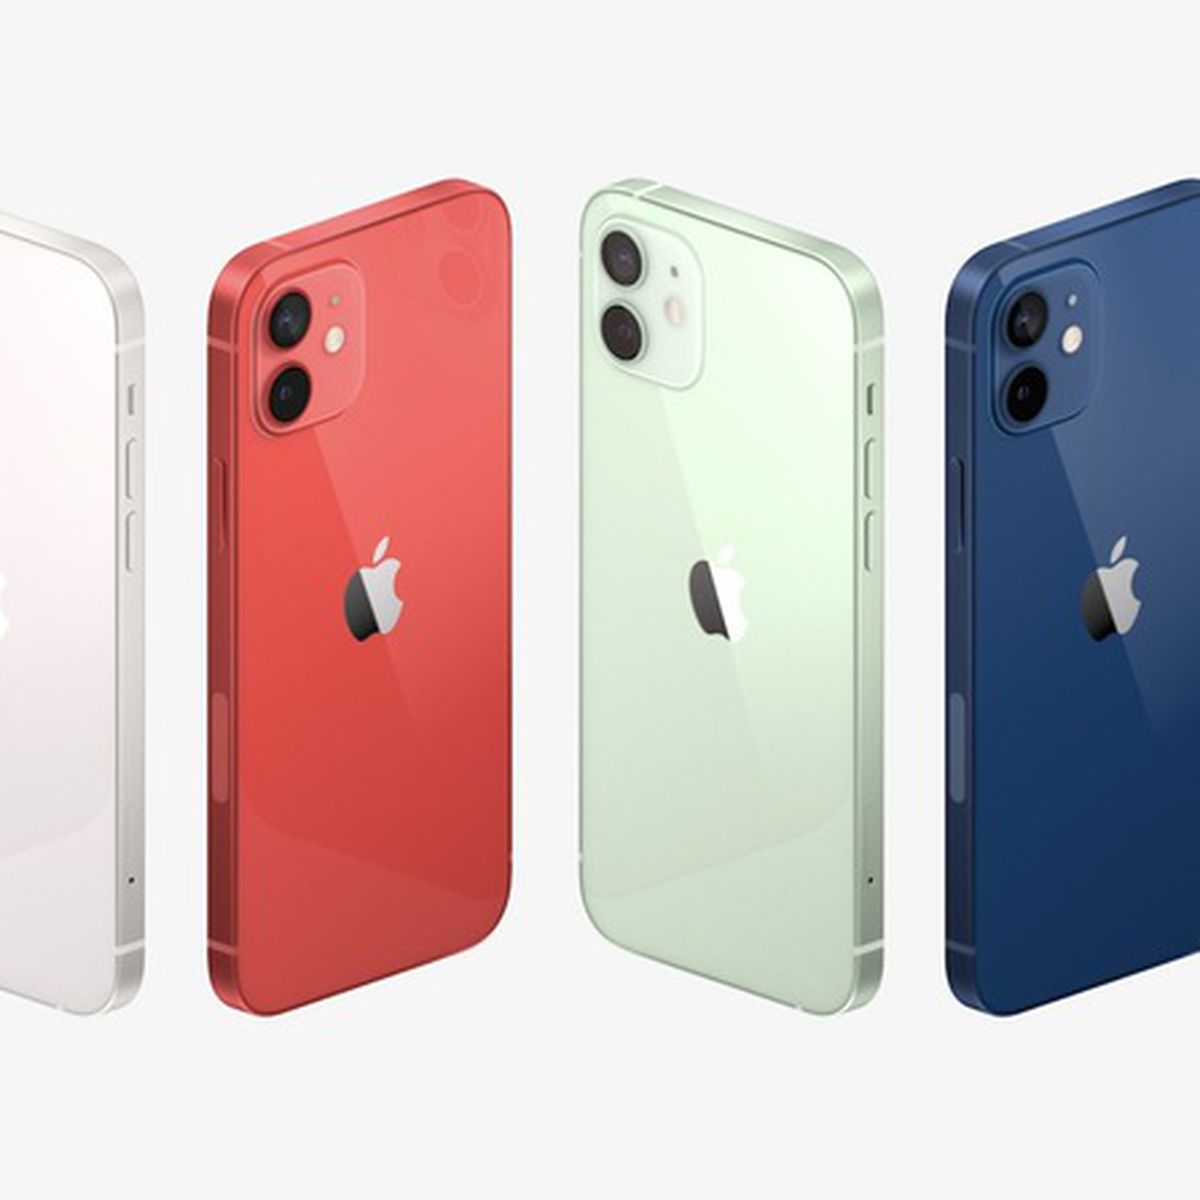 Iphone 12 Introduced With Flat Edge Design 5g A14 Chip New Colors Magsafe And More Macrumors